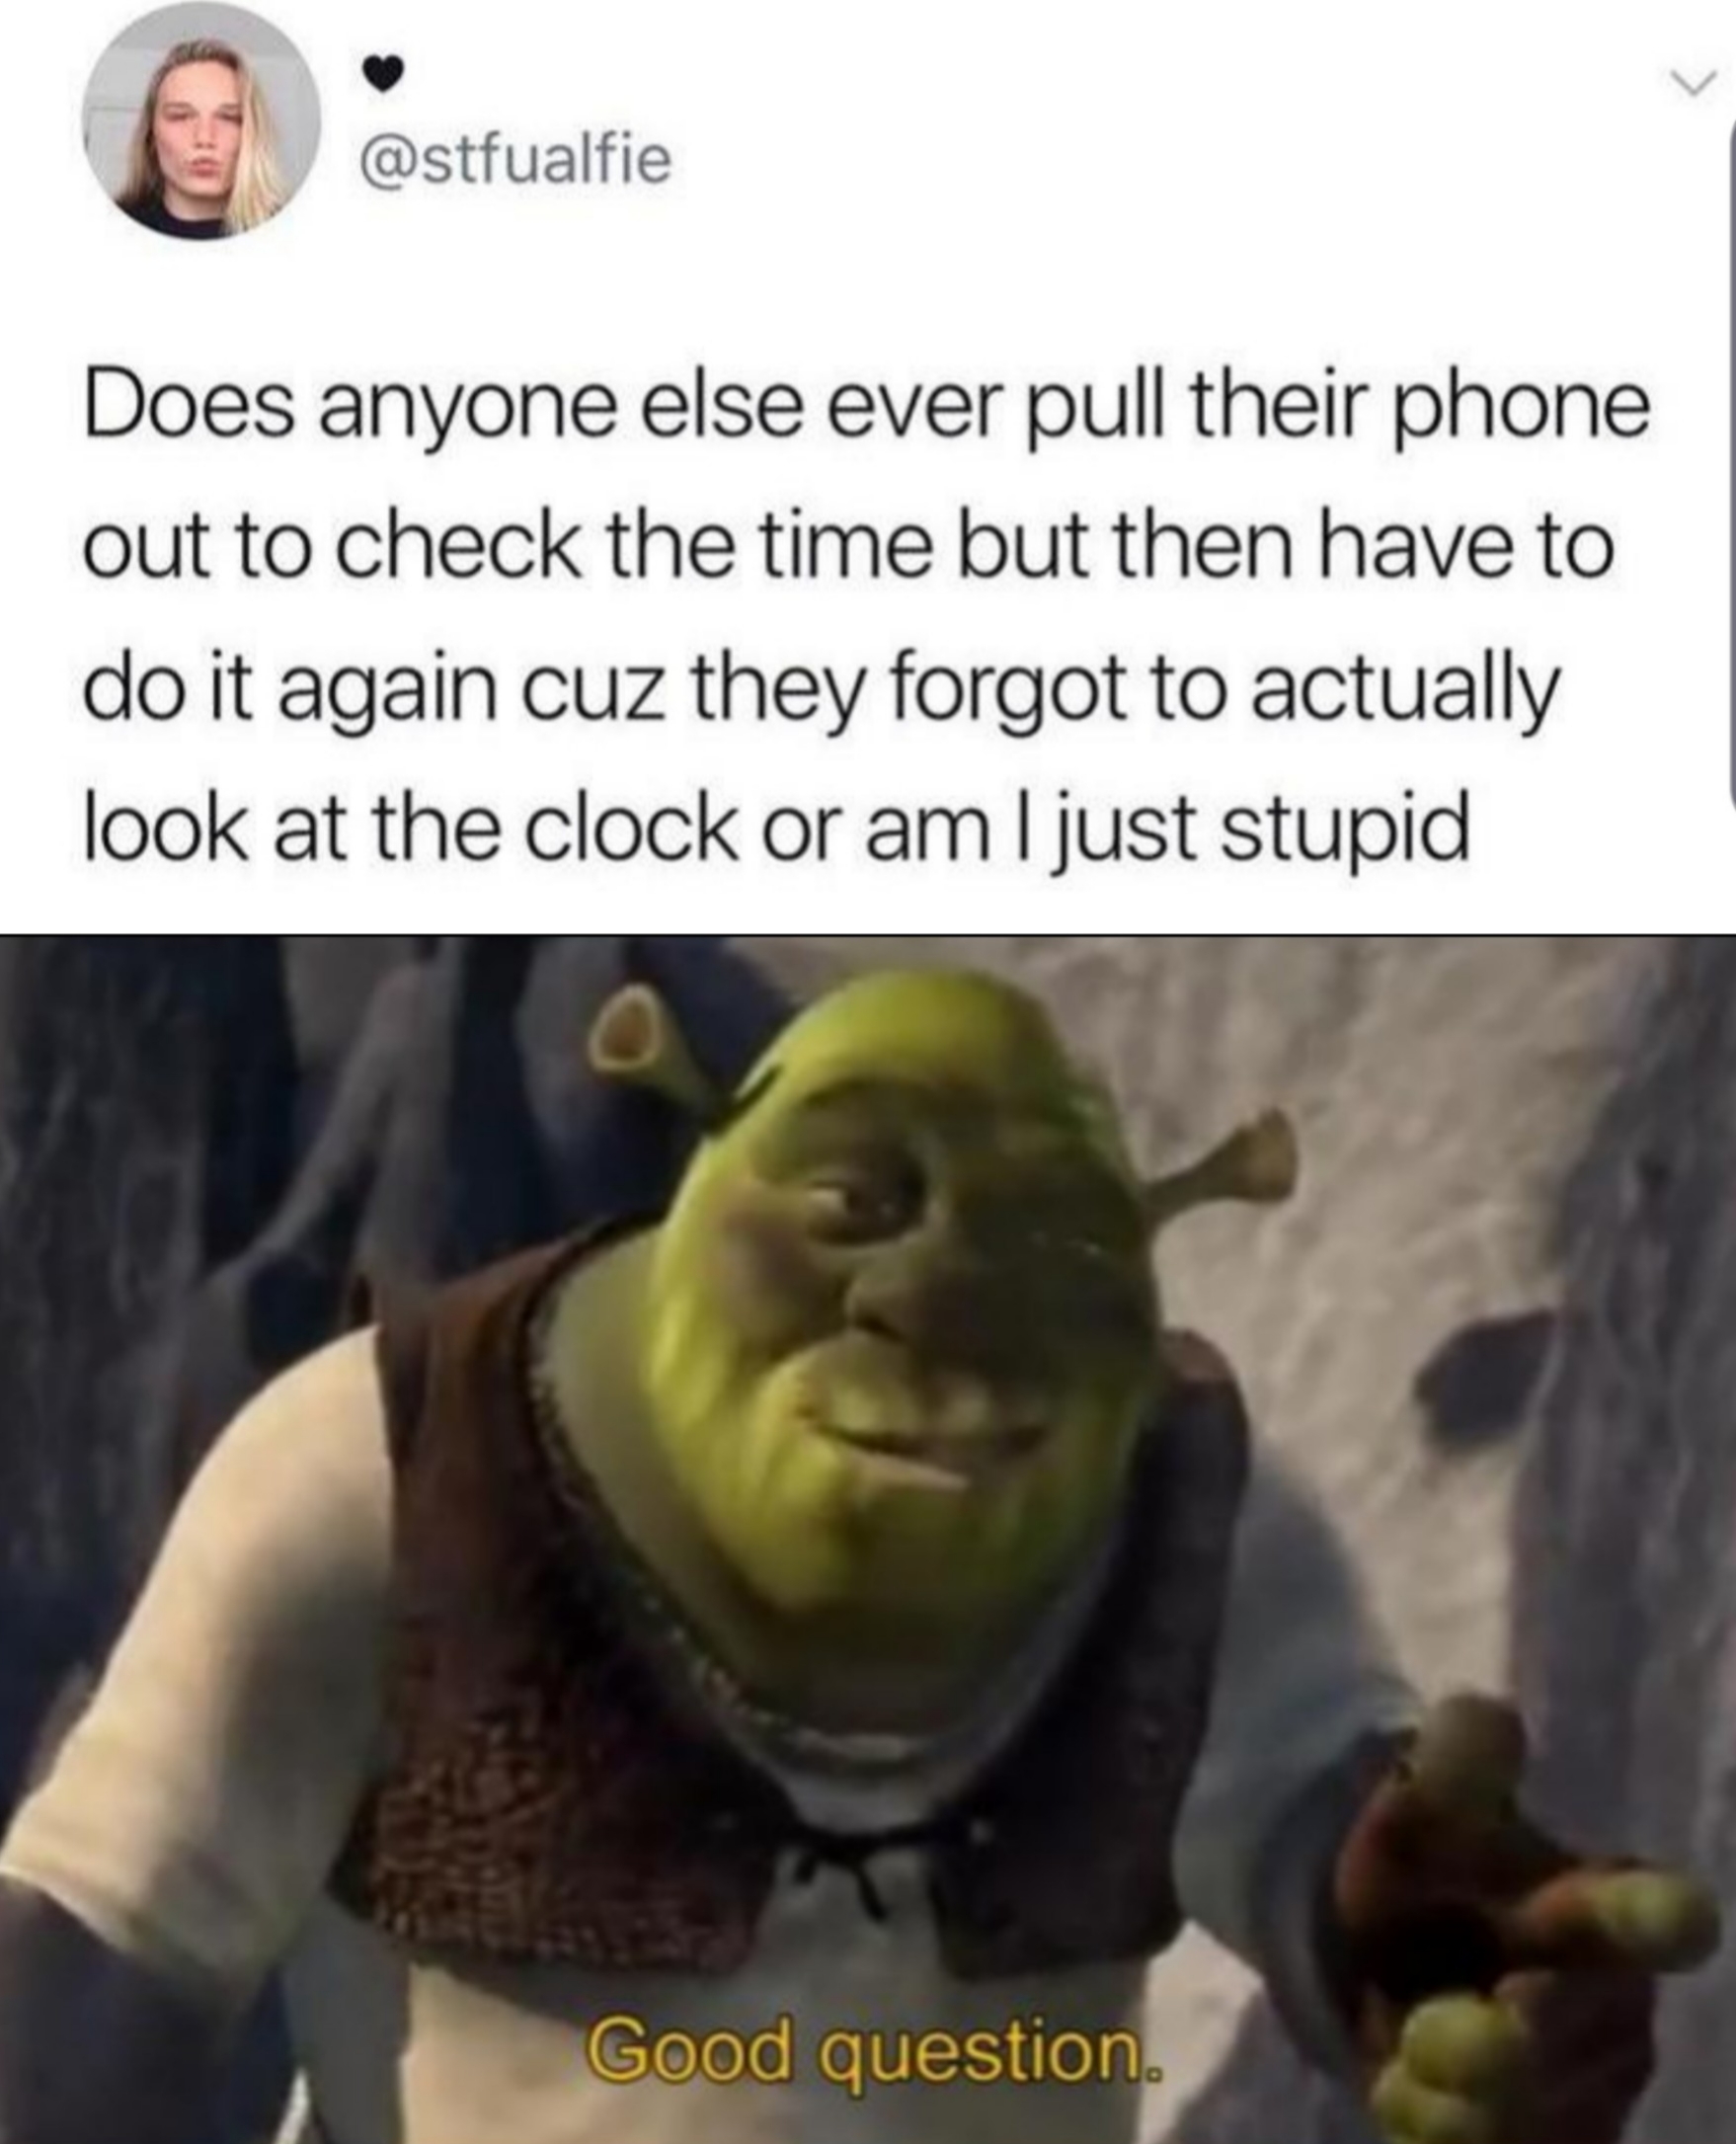 that's a good question meme - stfalfie Does anyone else ever pull their phone out to check the time but then have to do it again cuz they forgot to actually look at the clock or am I just stupid Good question